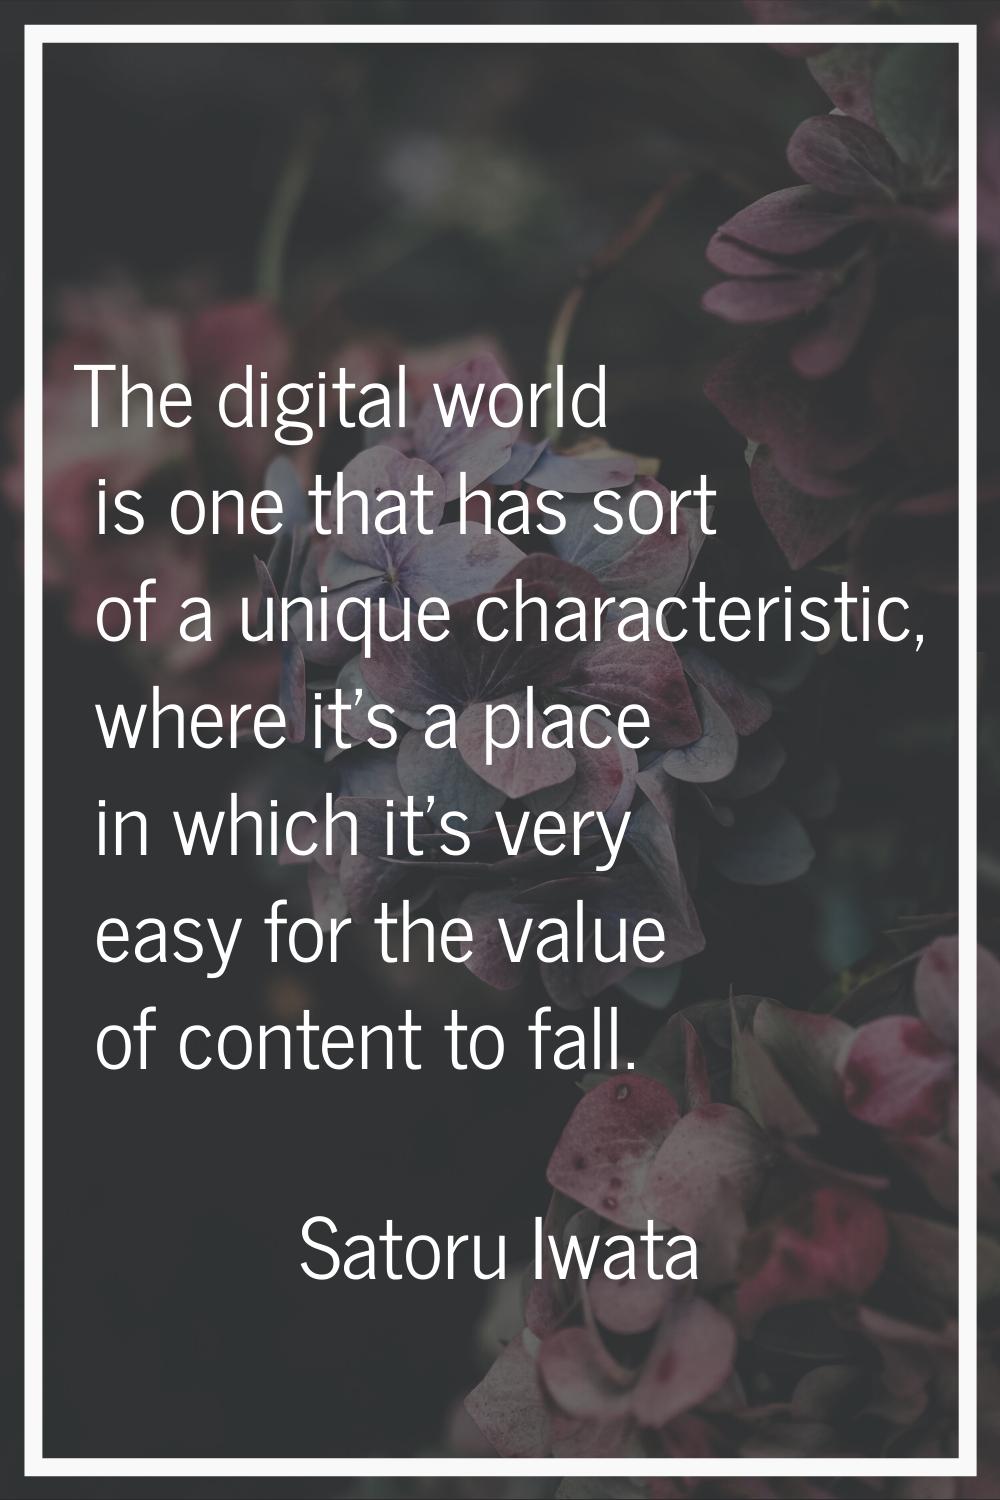 The digital world is one that has sort of a unique characteristic, where it's a place in which it's